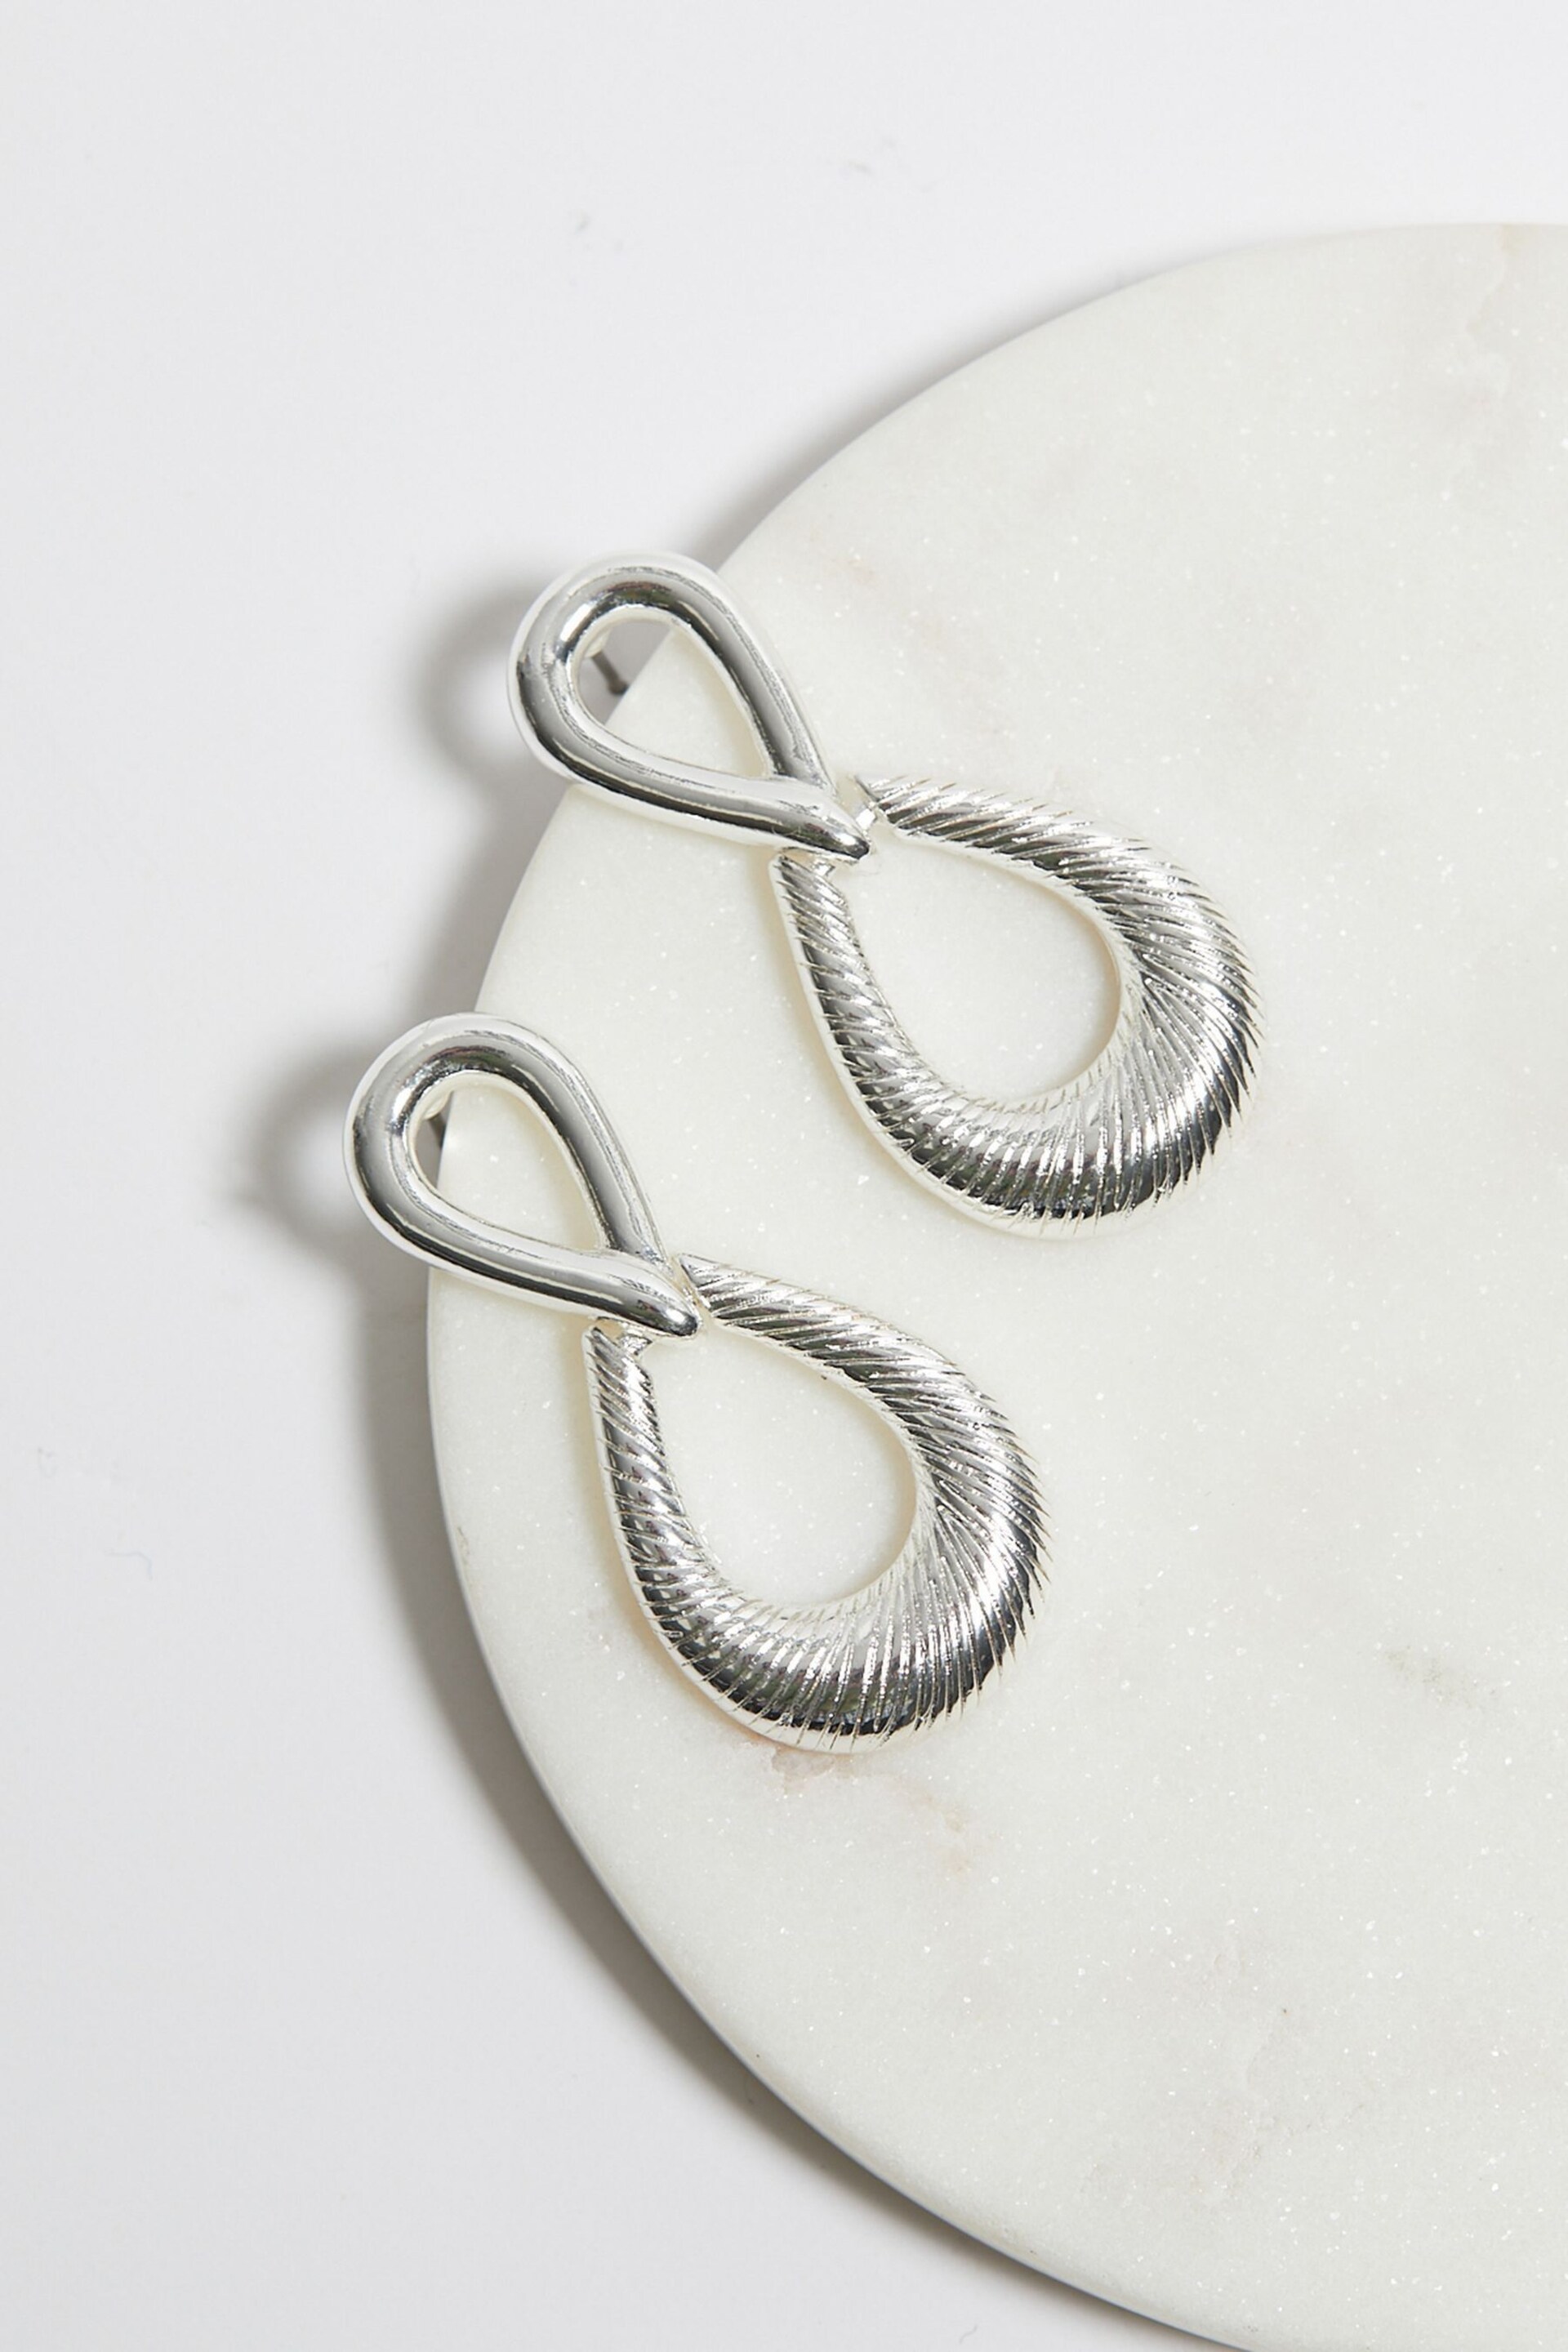 Mood Silver Recycled Polished And Textured Tear Drop Earrings - Image 2 of 3